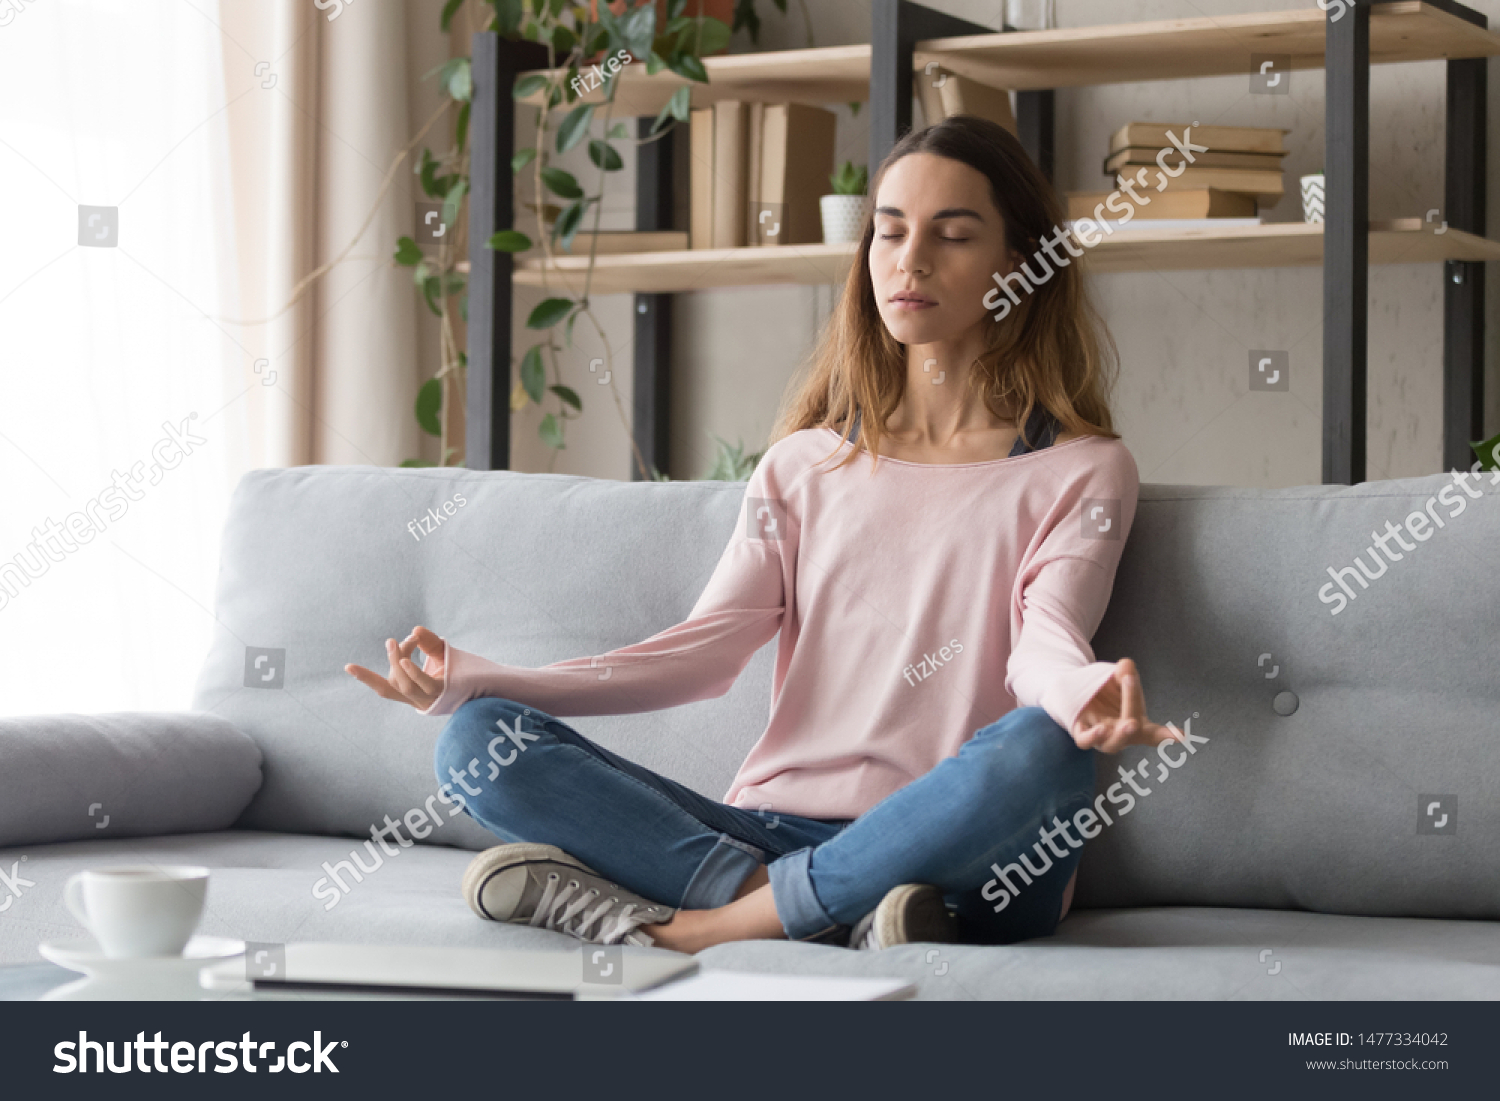 Carefree calm millennial freelance girl sitting on couch in lotus position and mudra gesture, relaxing, doing yoga practice. Young serene woman meditating, visualizing, healthy lifestyle concept. #1477334042